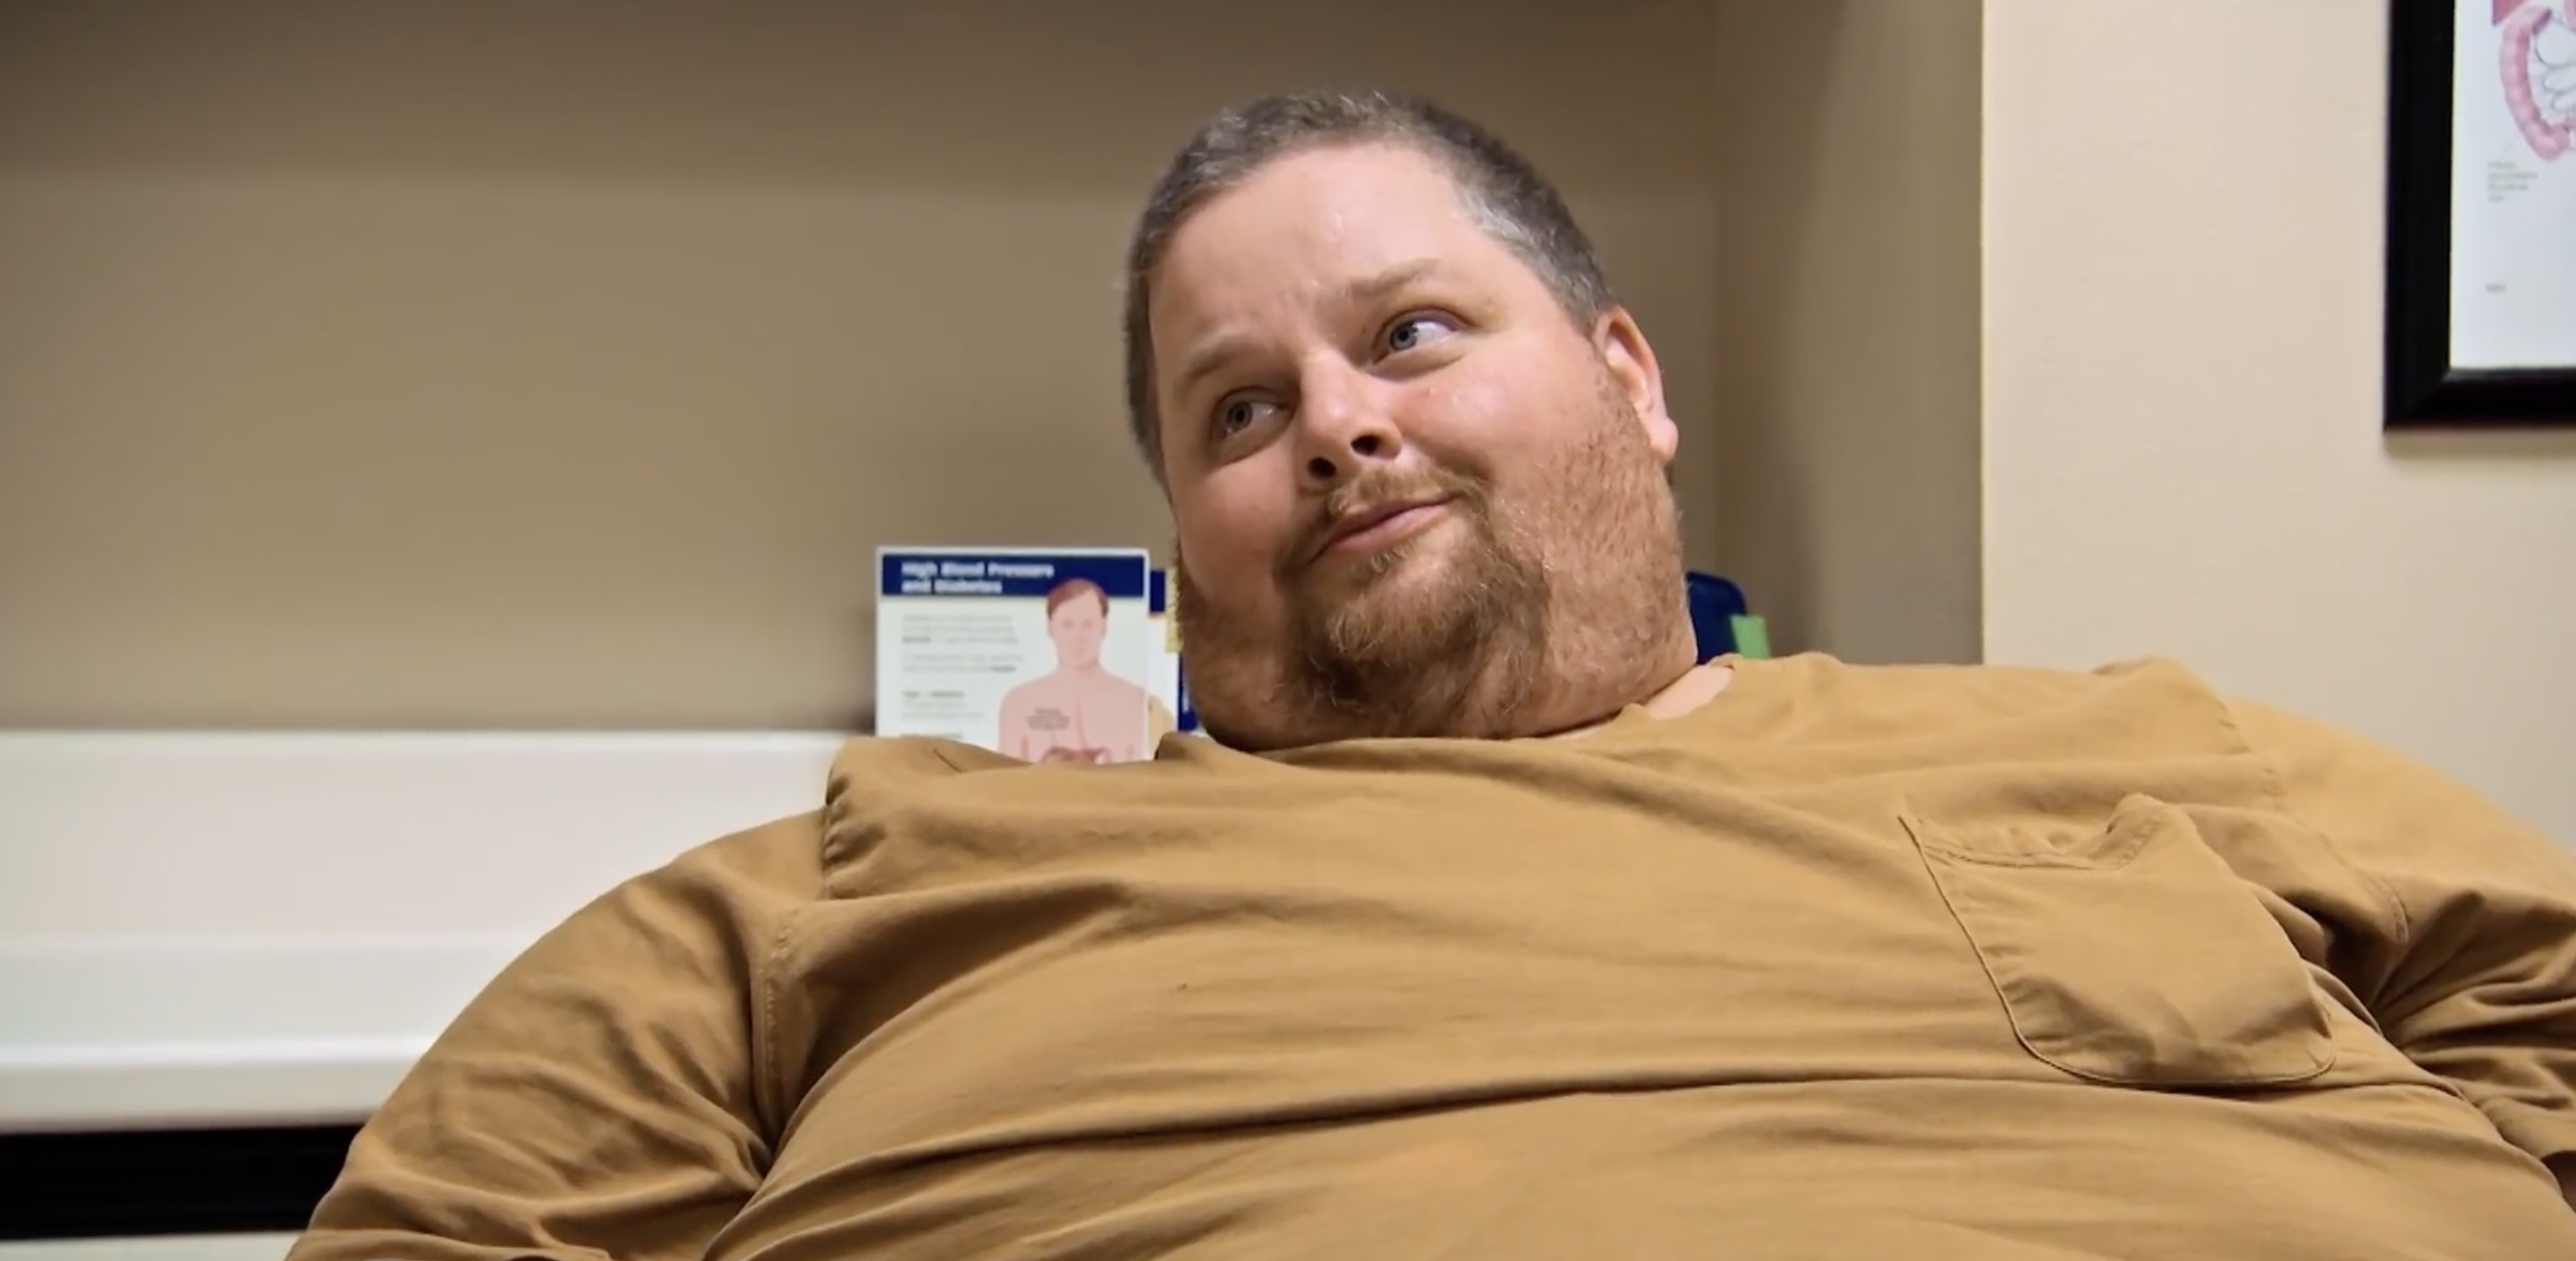 Patrick Macon from My 600 lb Life has been diagnosed with cancer since the show